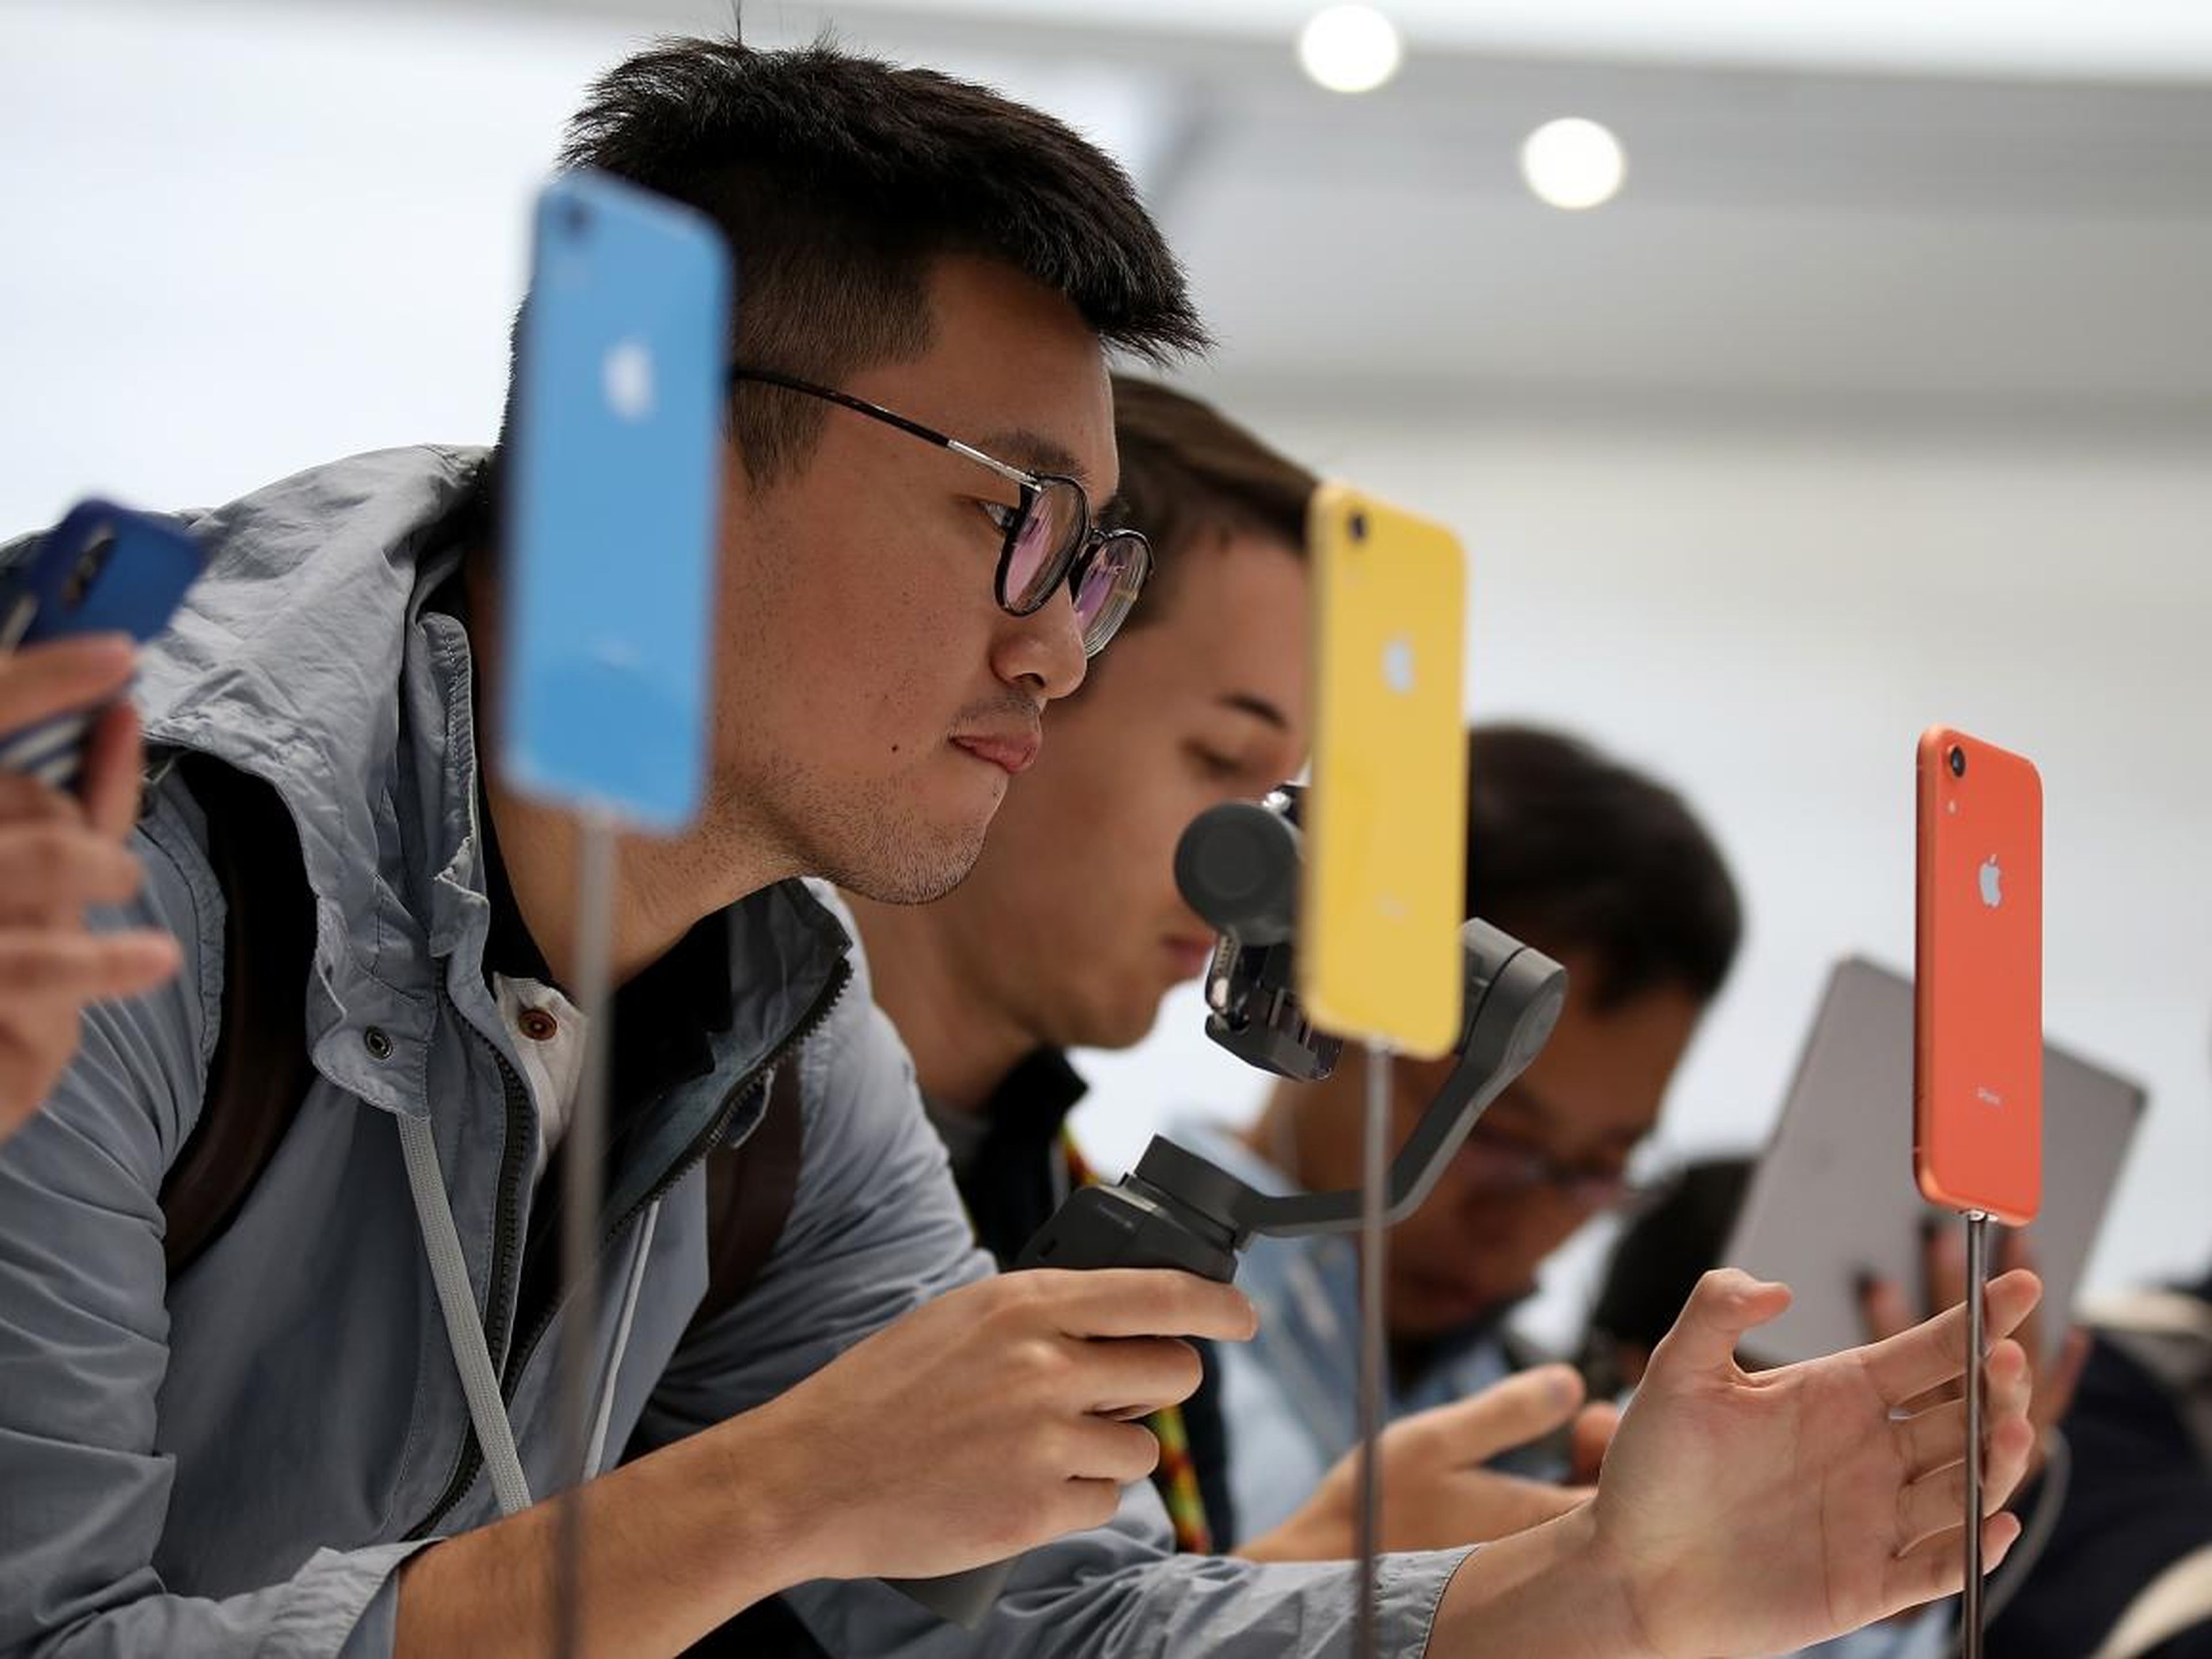 Visitors inspecting the new iPhone XR during an Apple event at the Steve Jobs Theatre on September 12 in Cupertino, California.